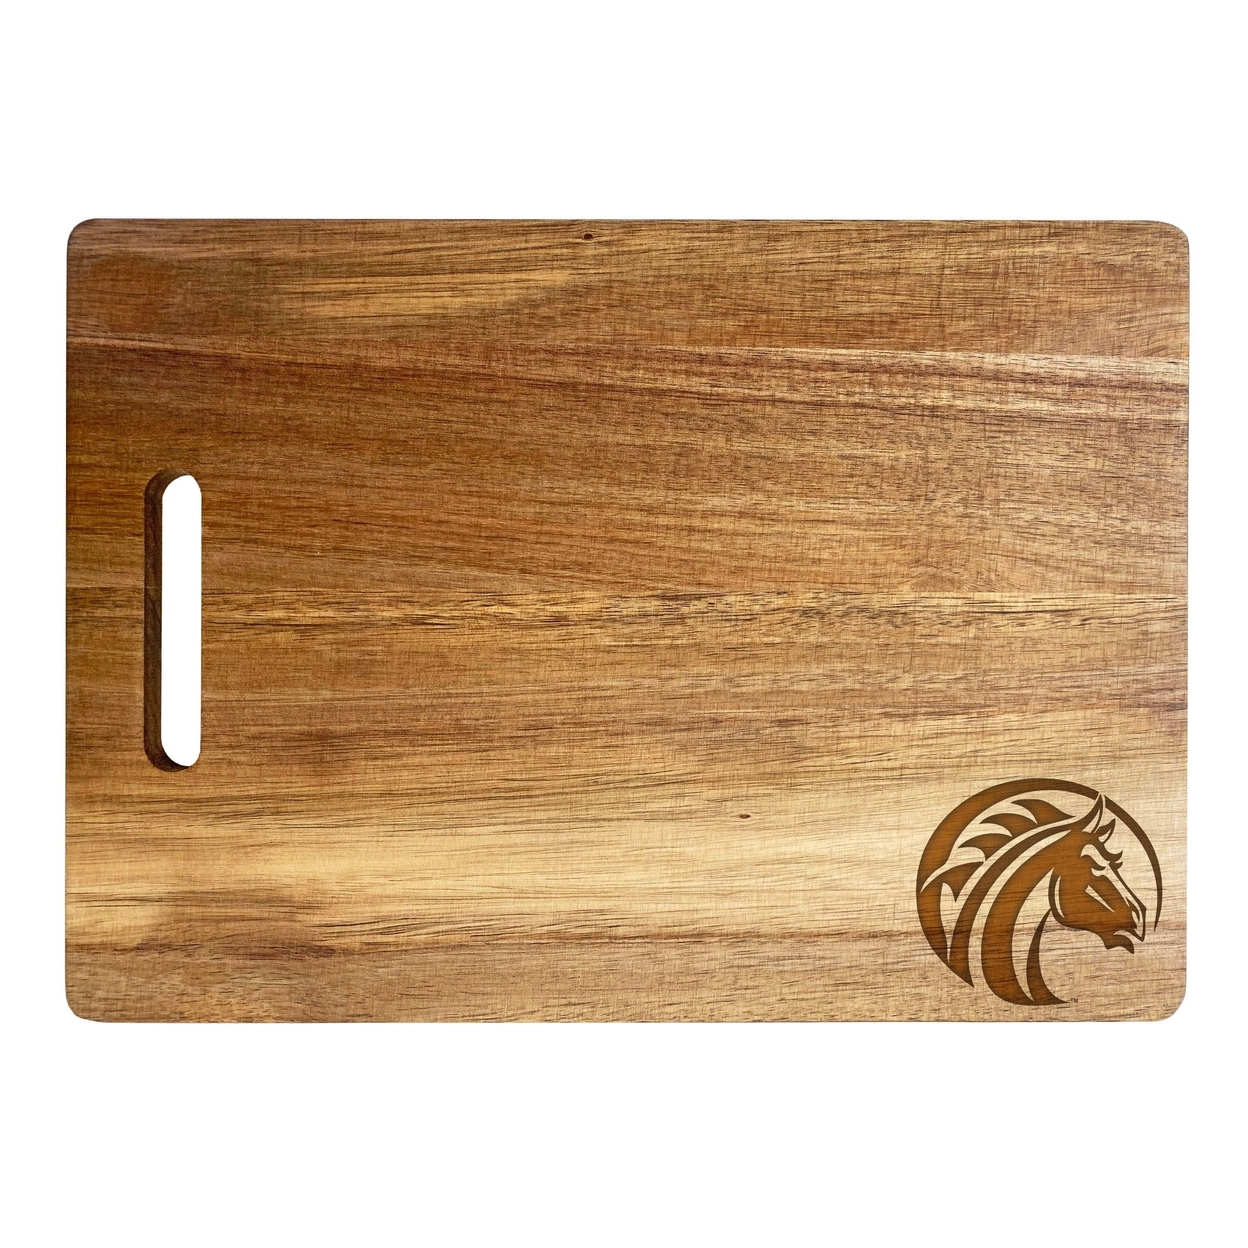 Fayetteville State University Engraved Wooden Cutting Board 10 X 14 Acacia Wood - Small Engraving